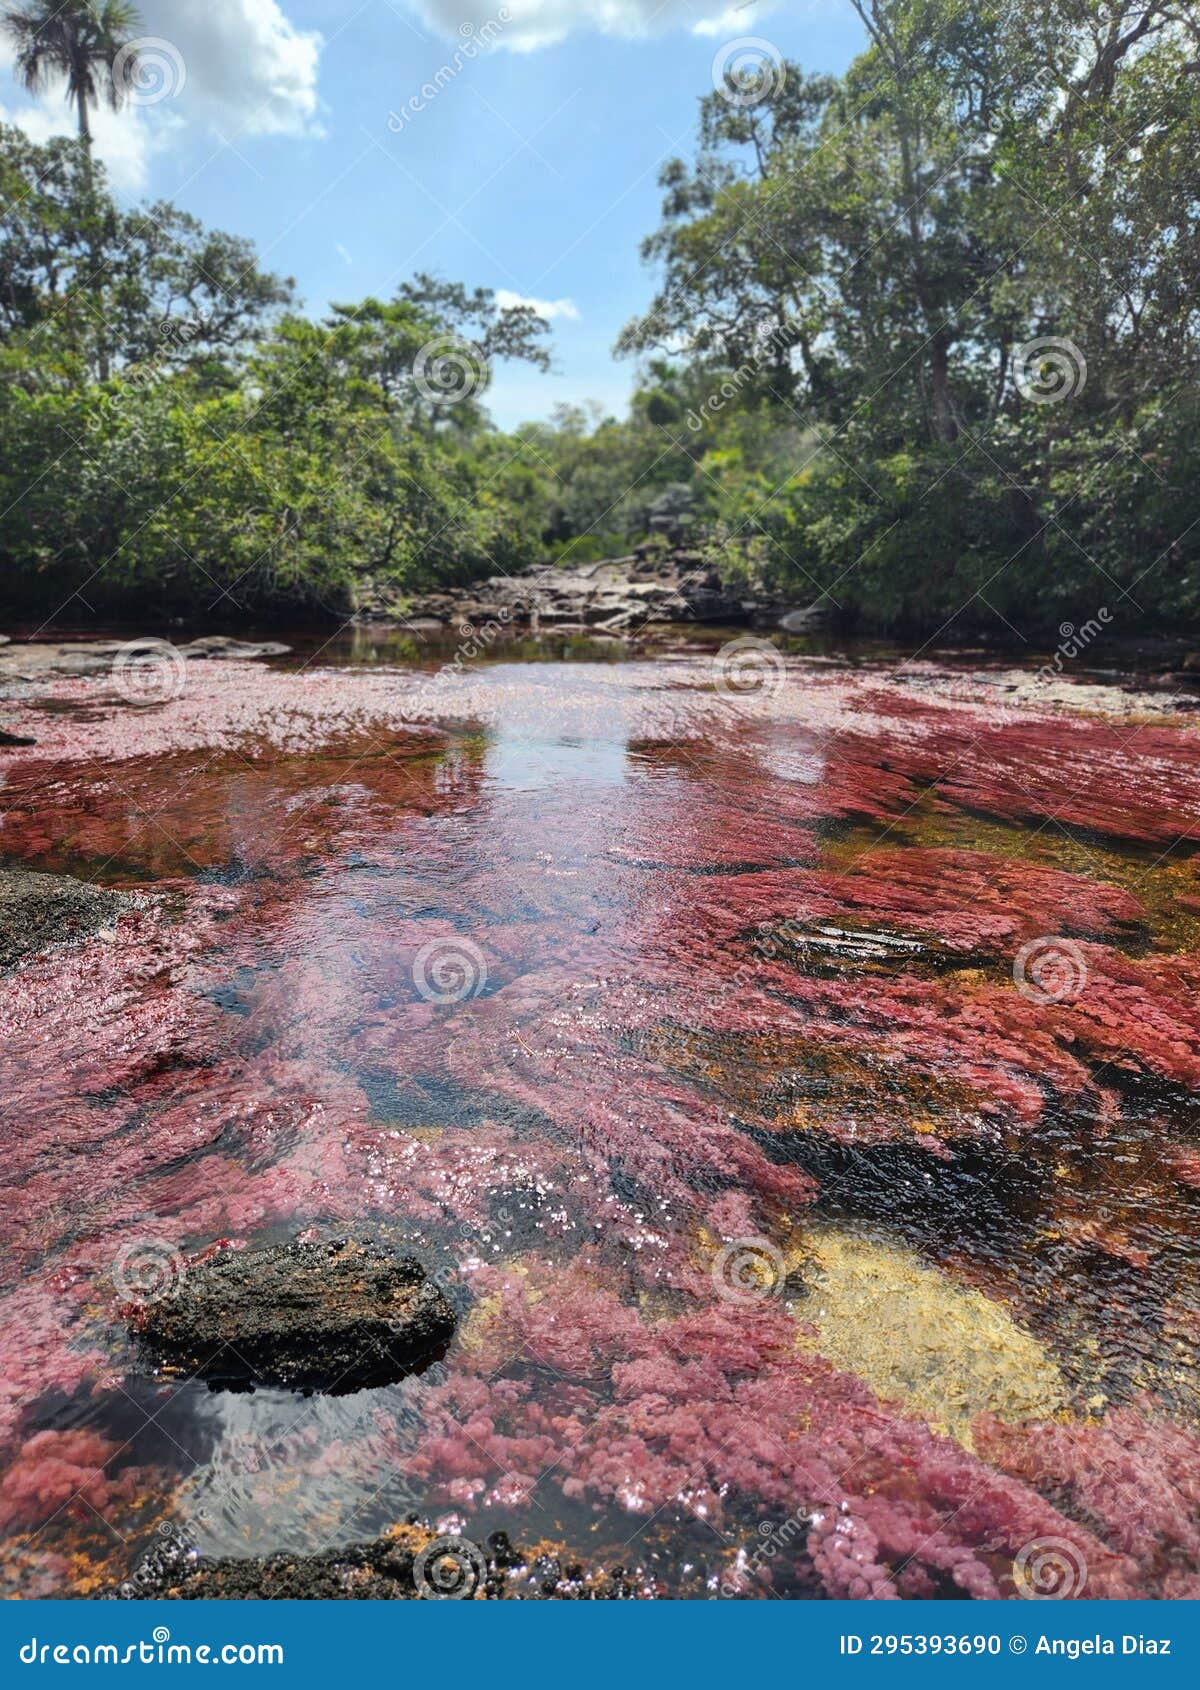 caÃ±o cristales, colombia. most beautiful river in the world